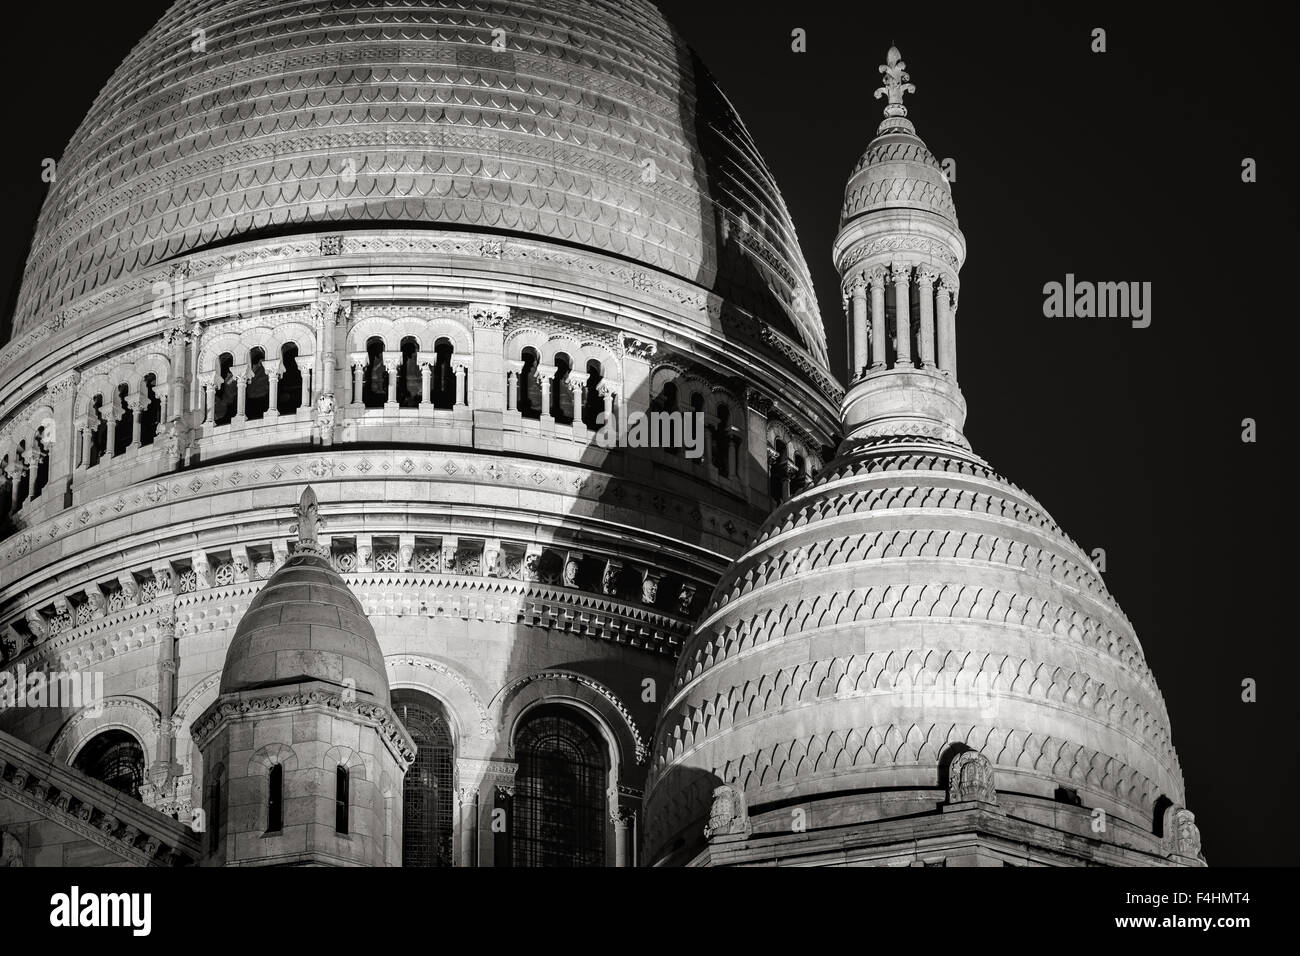 Detail of the Domes of Sacré Coeur Basilica (Basilica of the Sacred Heart) at night, Montmartre, 18th, Paris, France Stock Photo